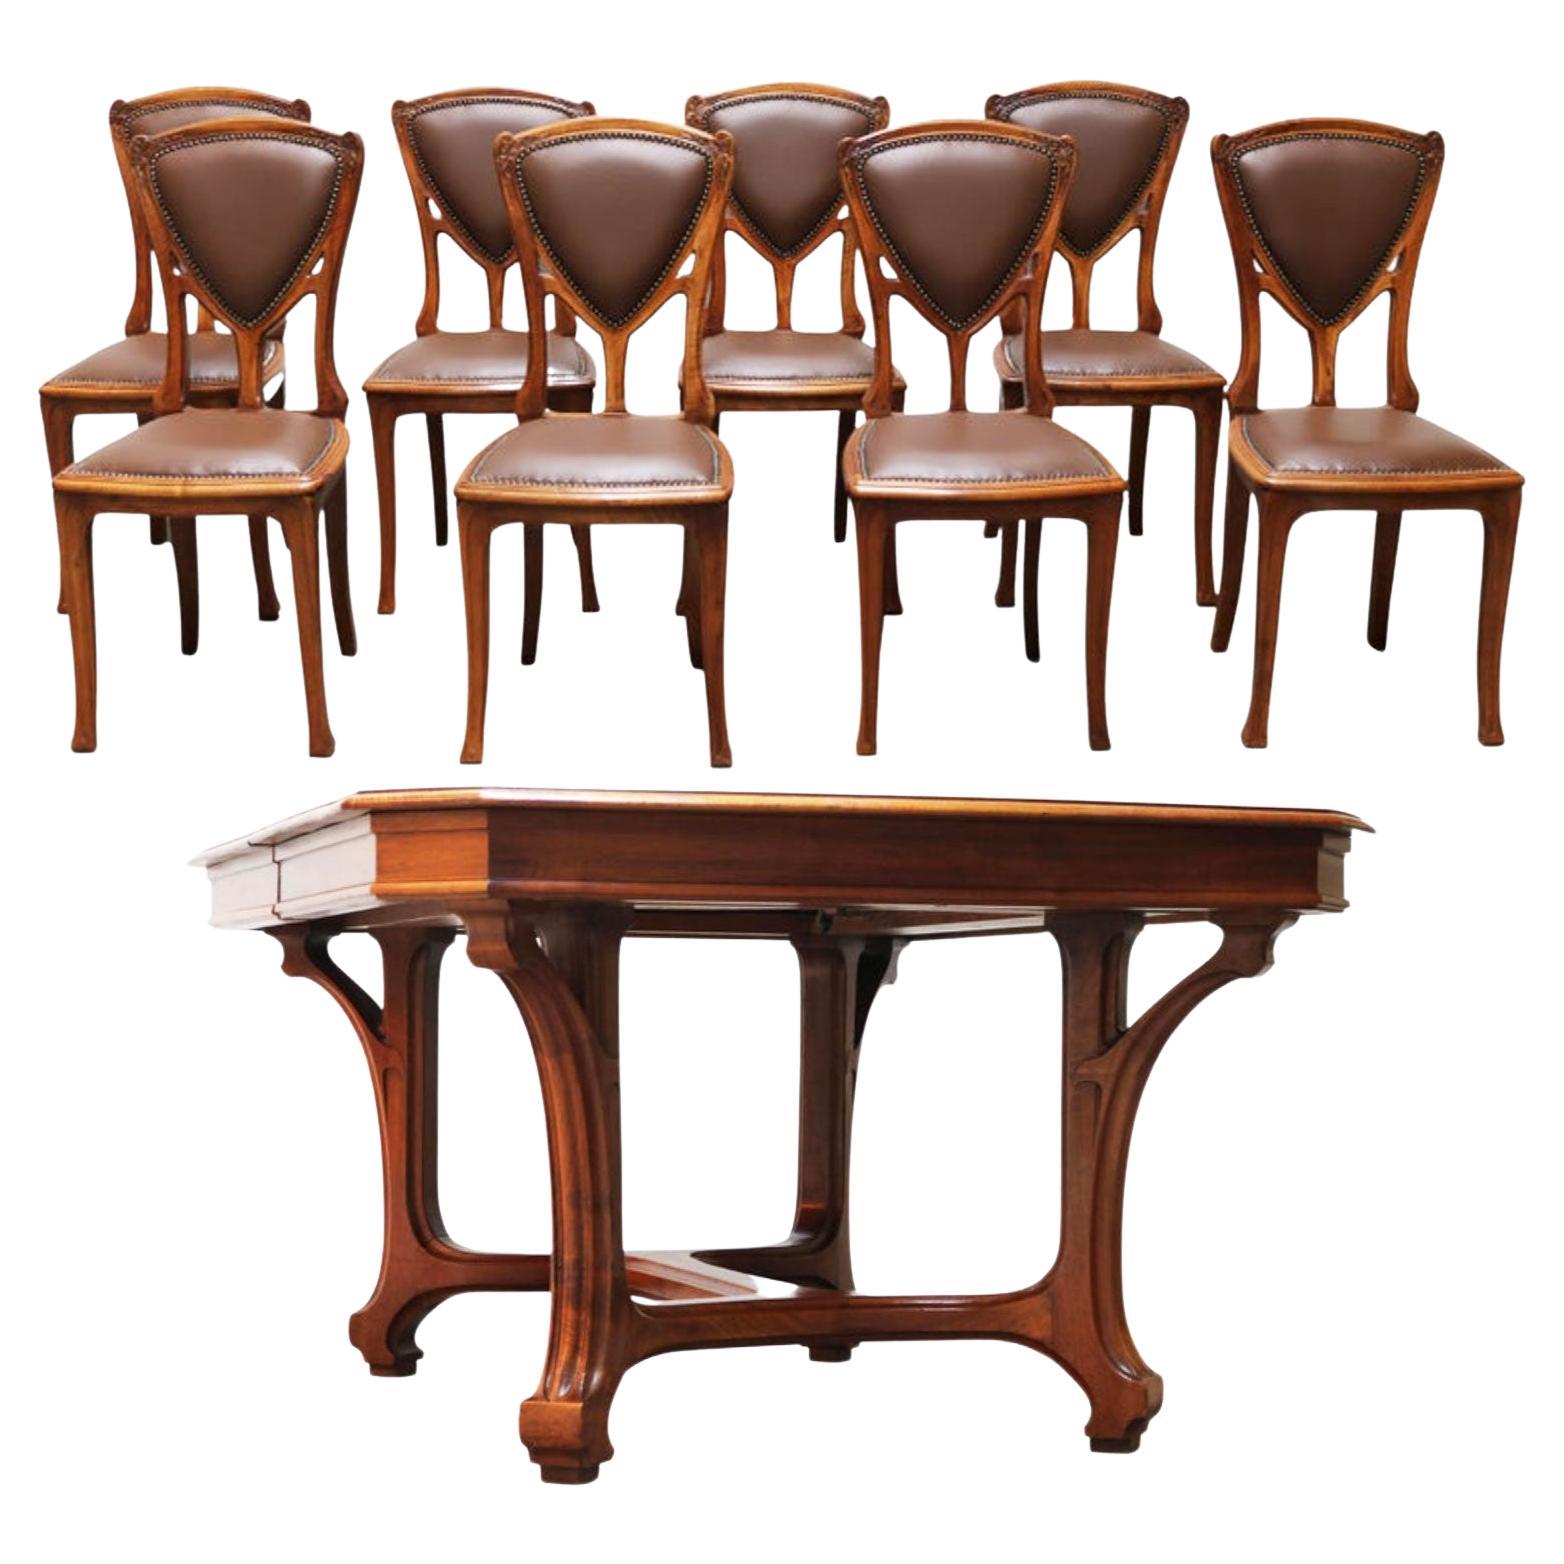 Antique French Art Nouveau Dining Room Set by Eugène Vallin 1903 Table Chairs For Sale